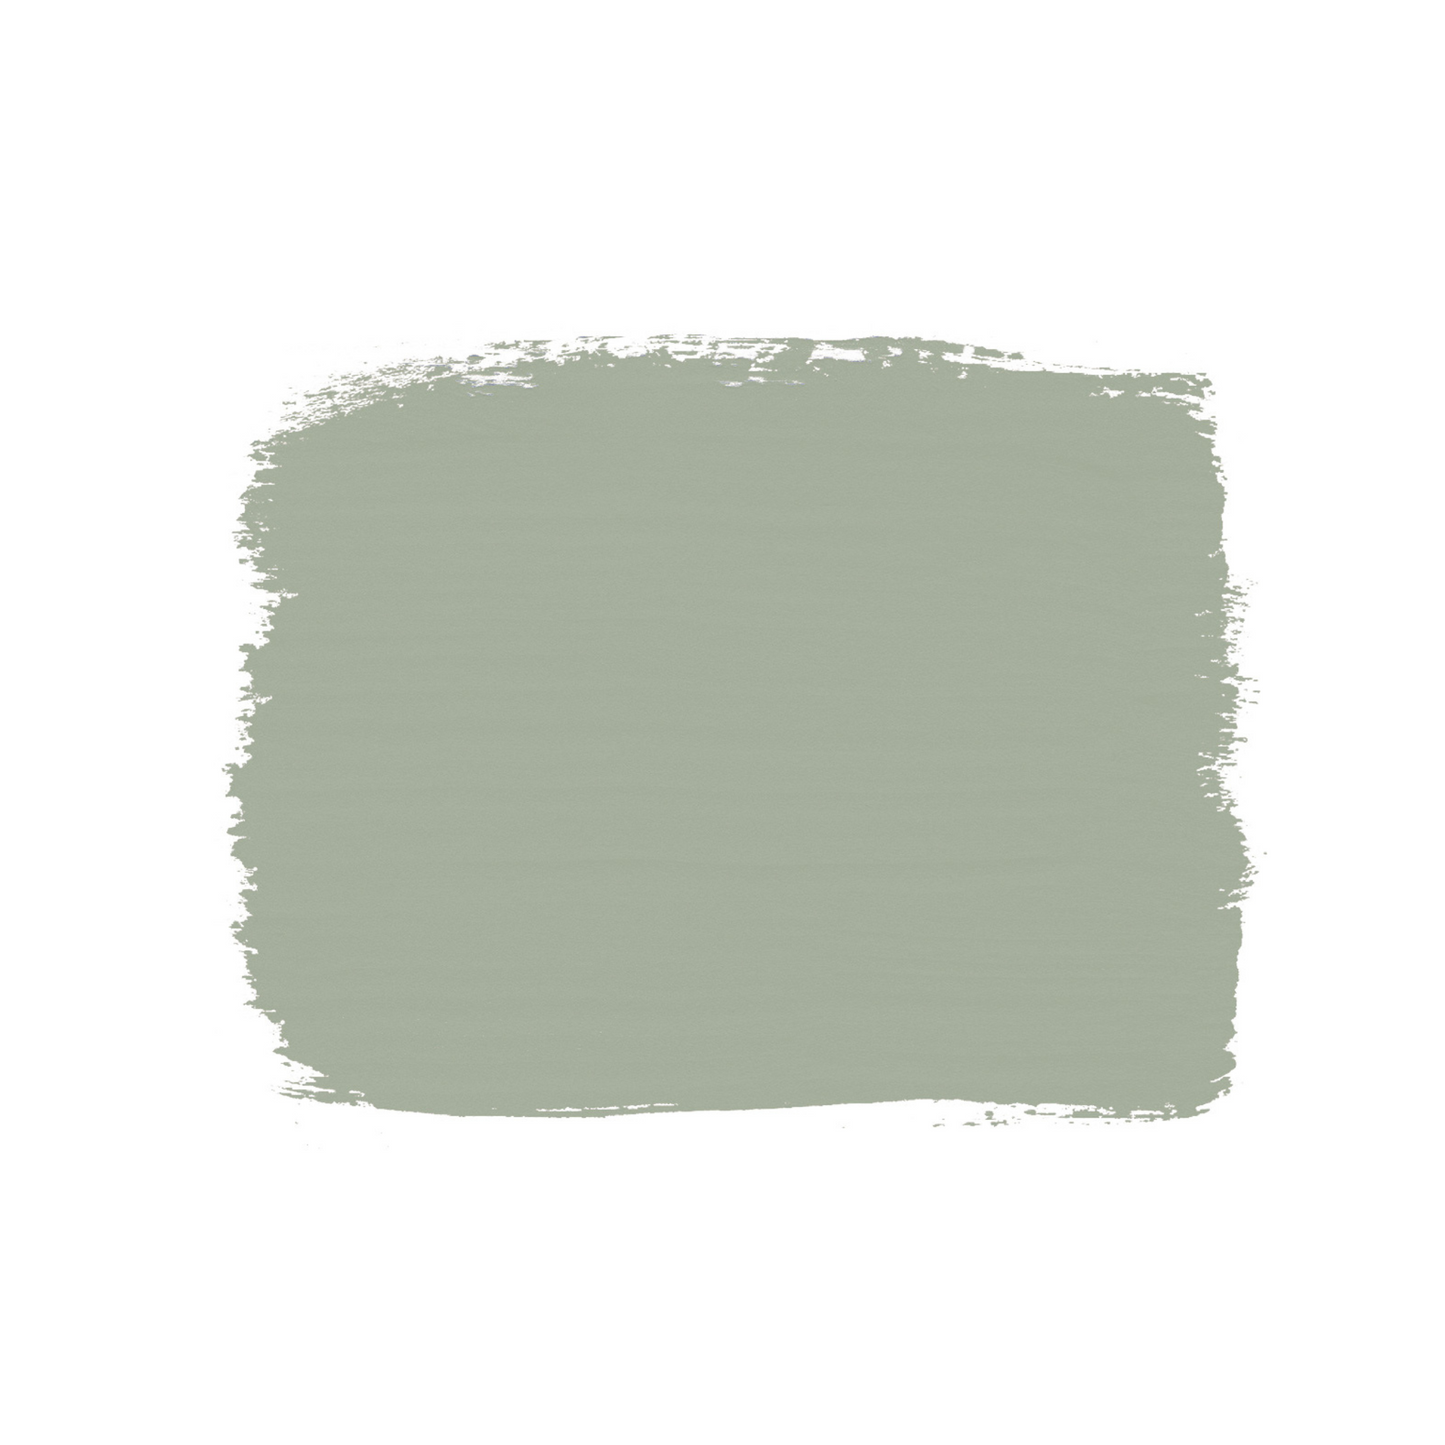 Swatch of Coolabah Green Annie Sloan Chalk Paint.